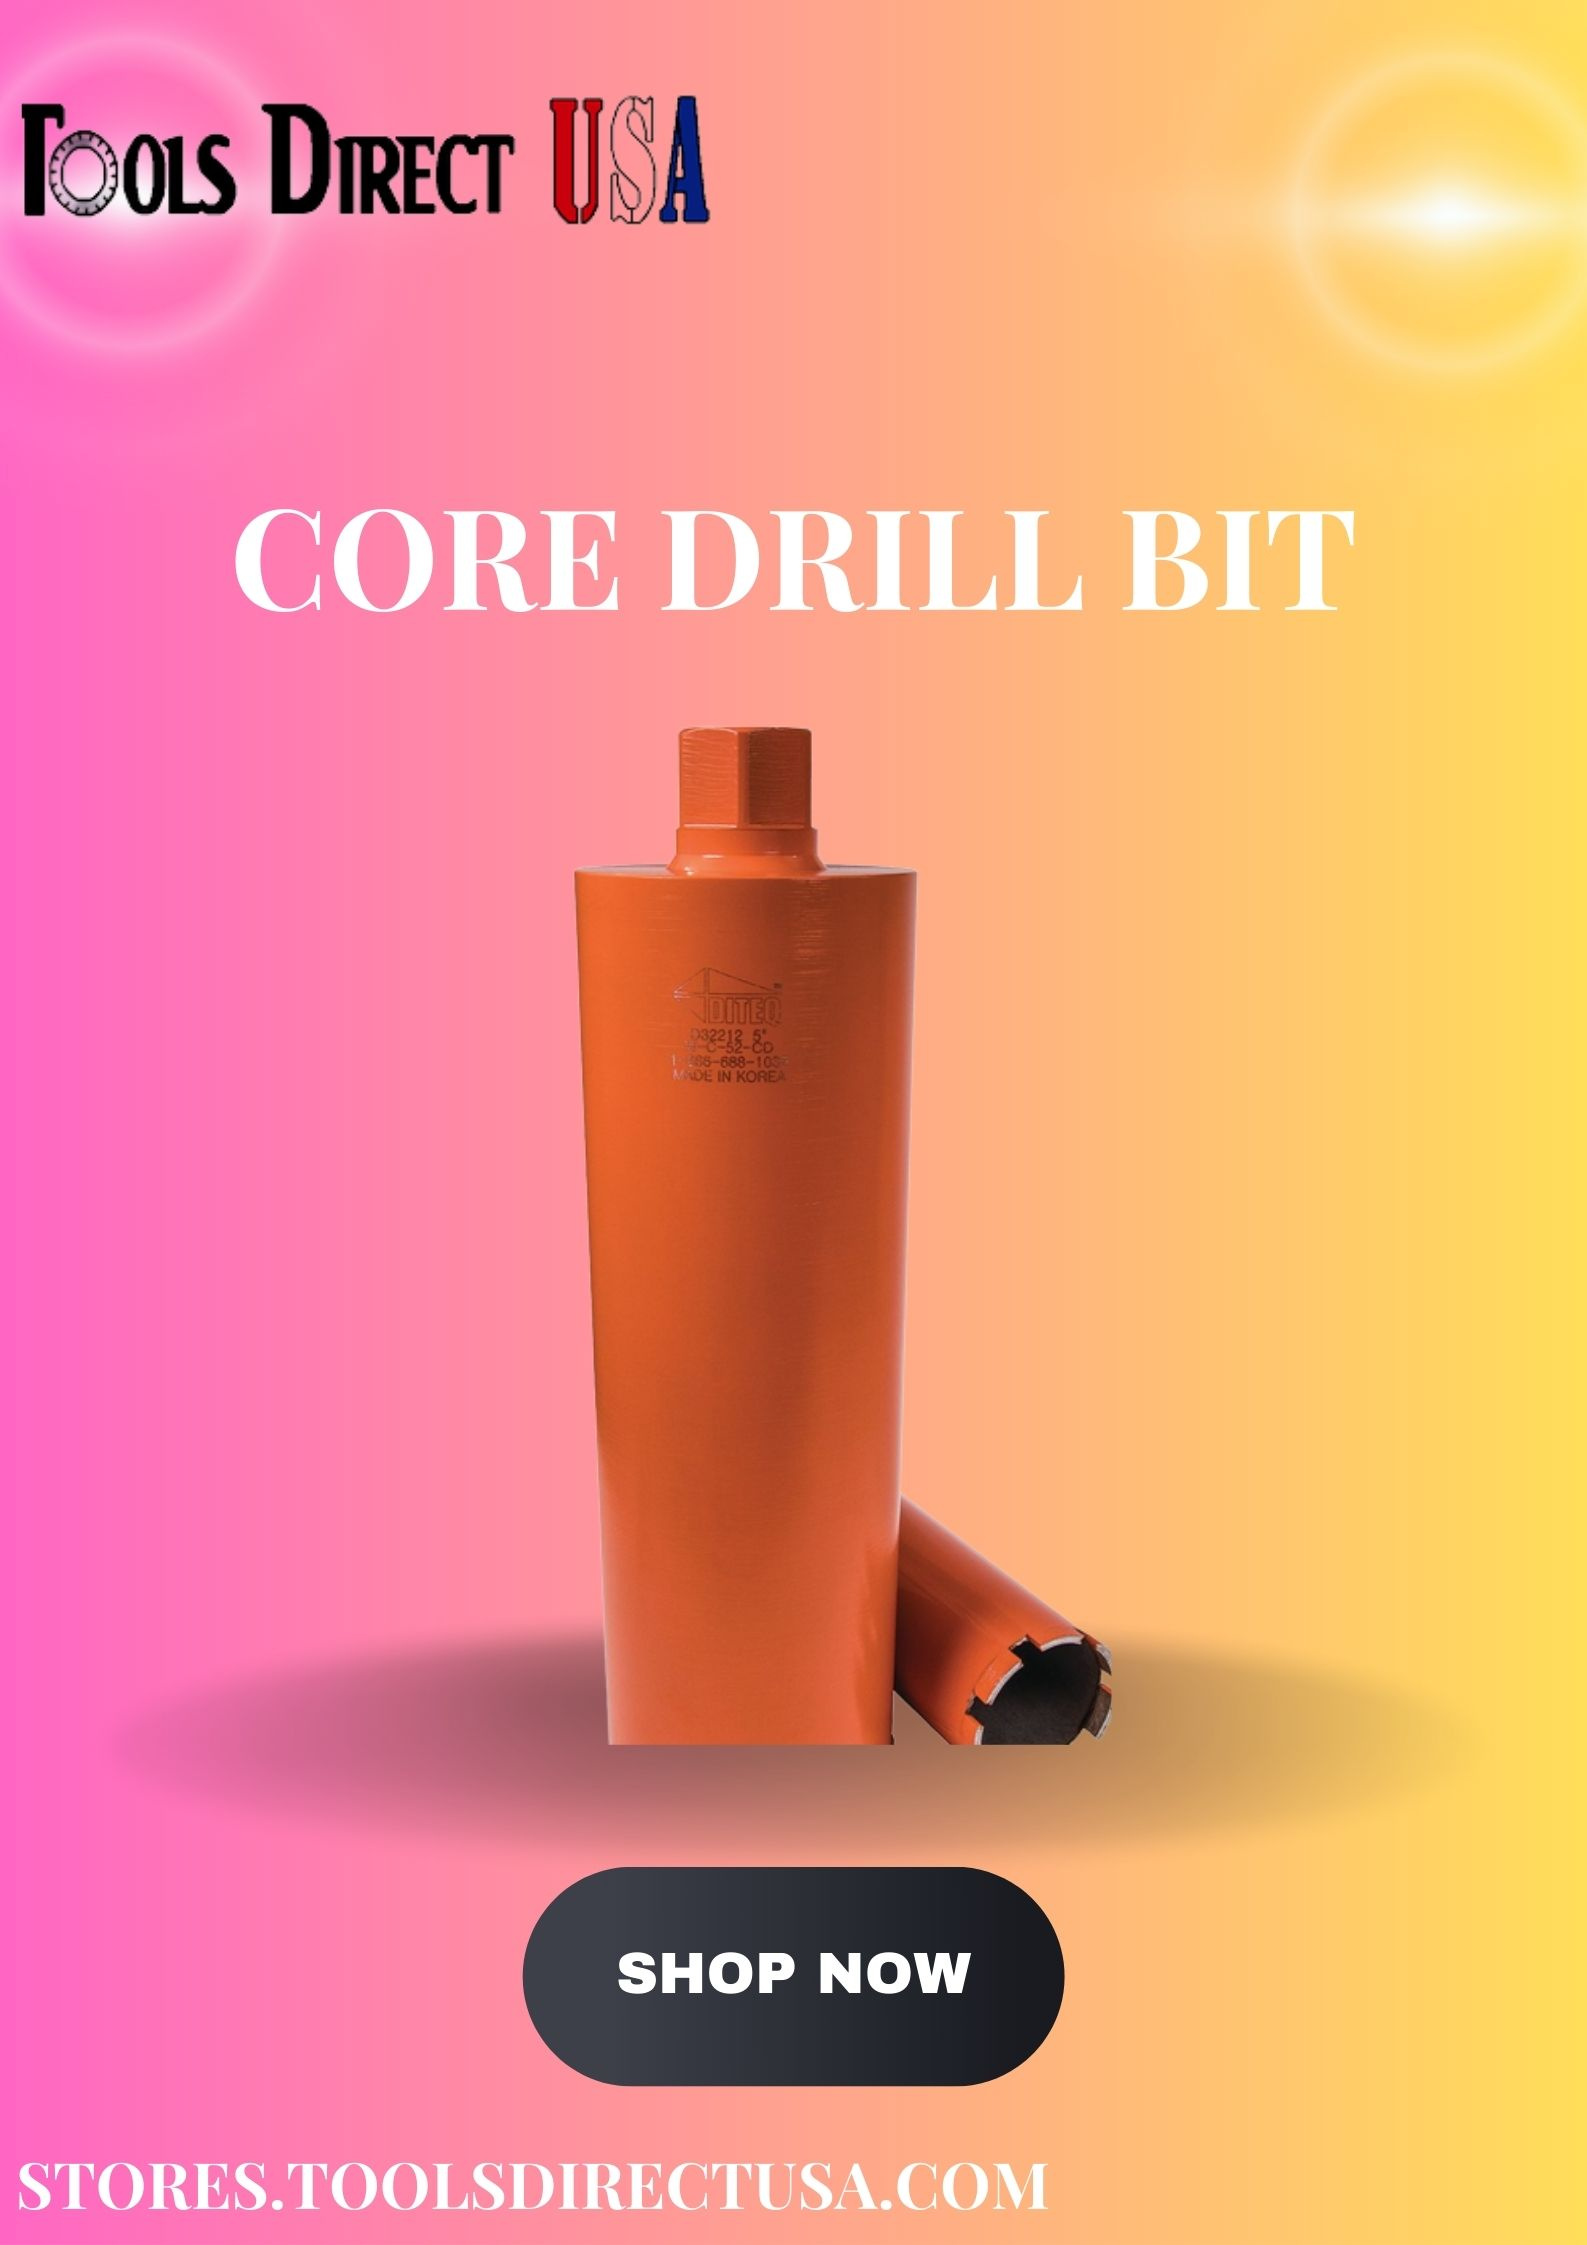 Core Drill Bit by Tools Direct USA on Dribbble